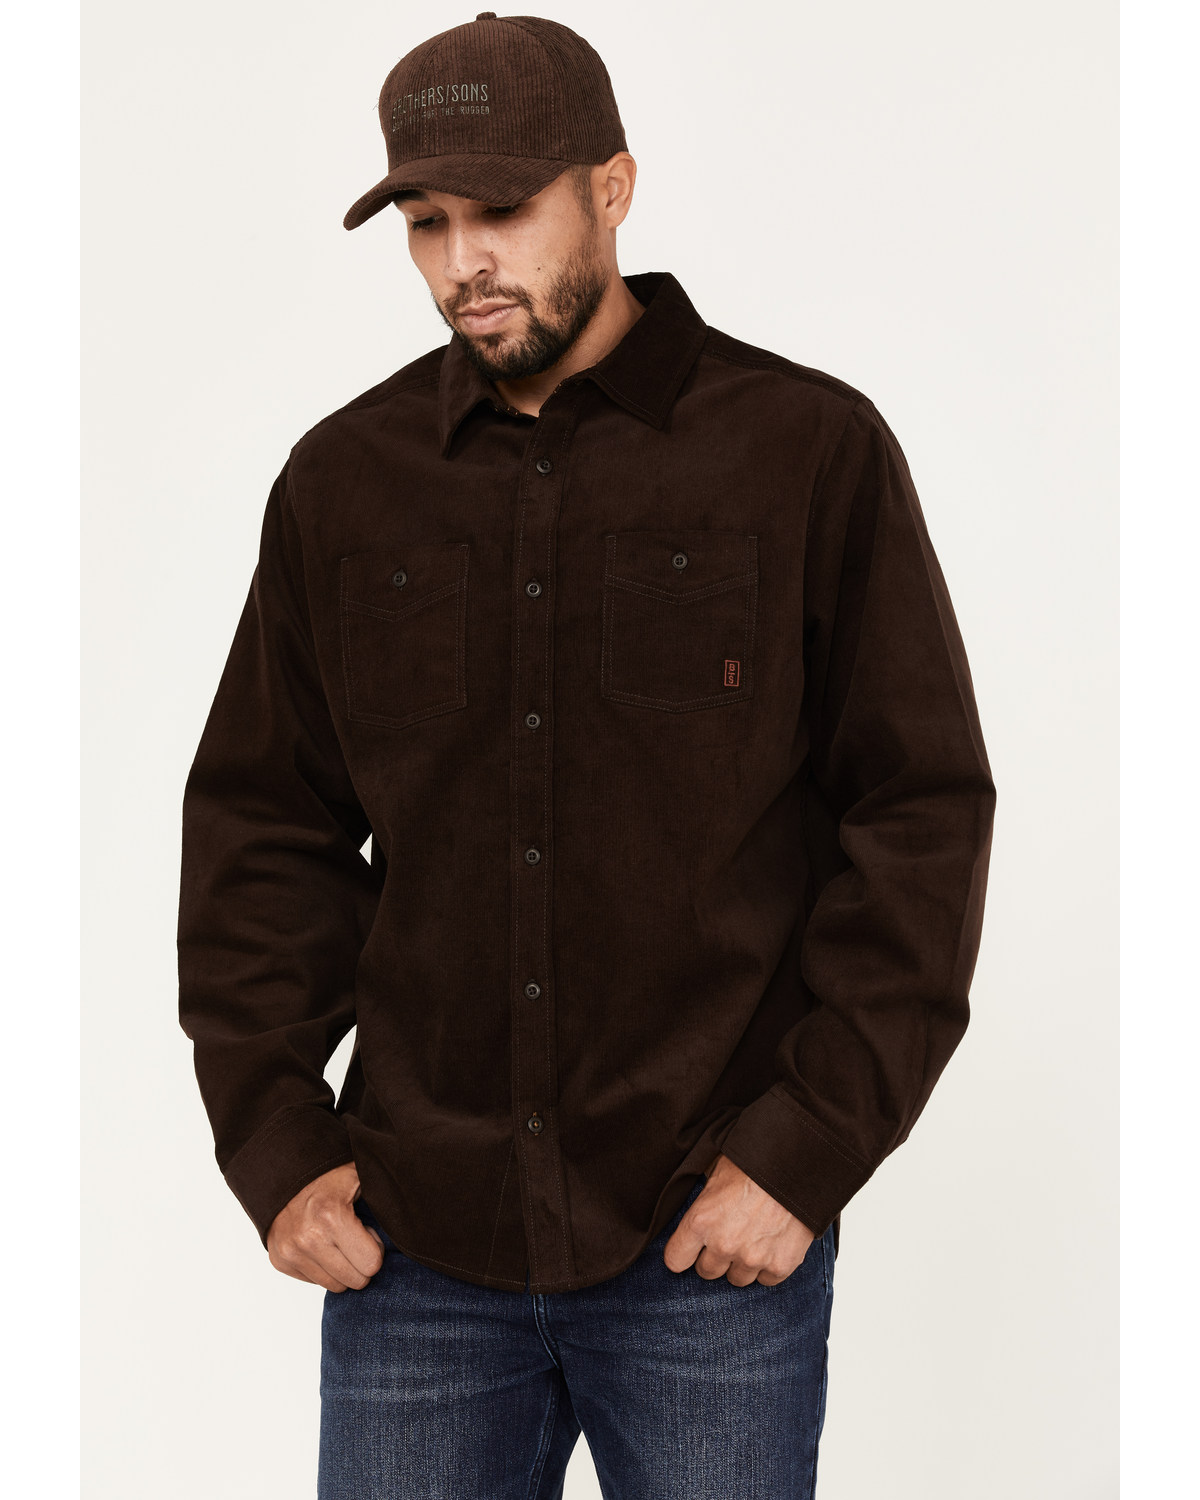 Brothers and Sons Men's Solid Corduroy Button Down Western Shirt